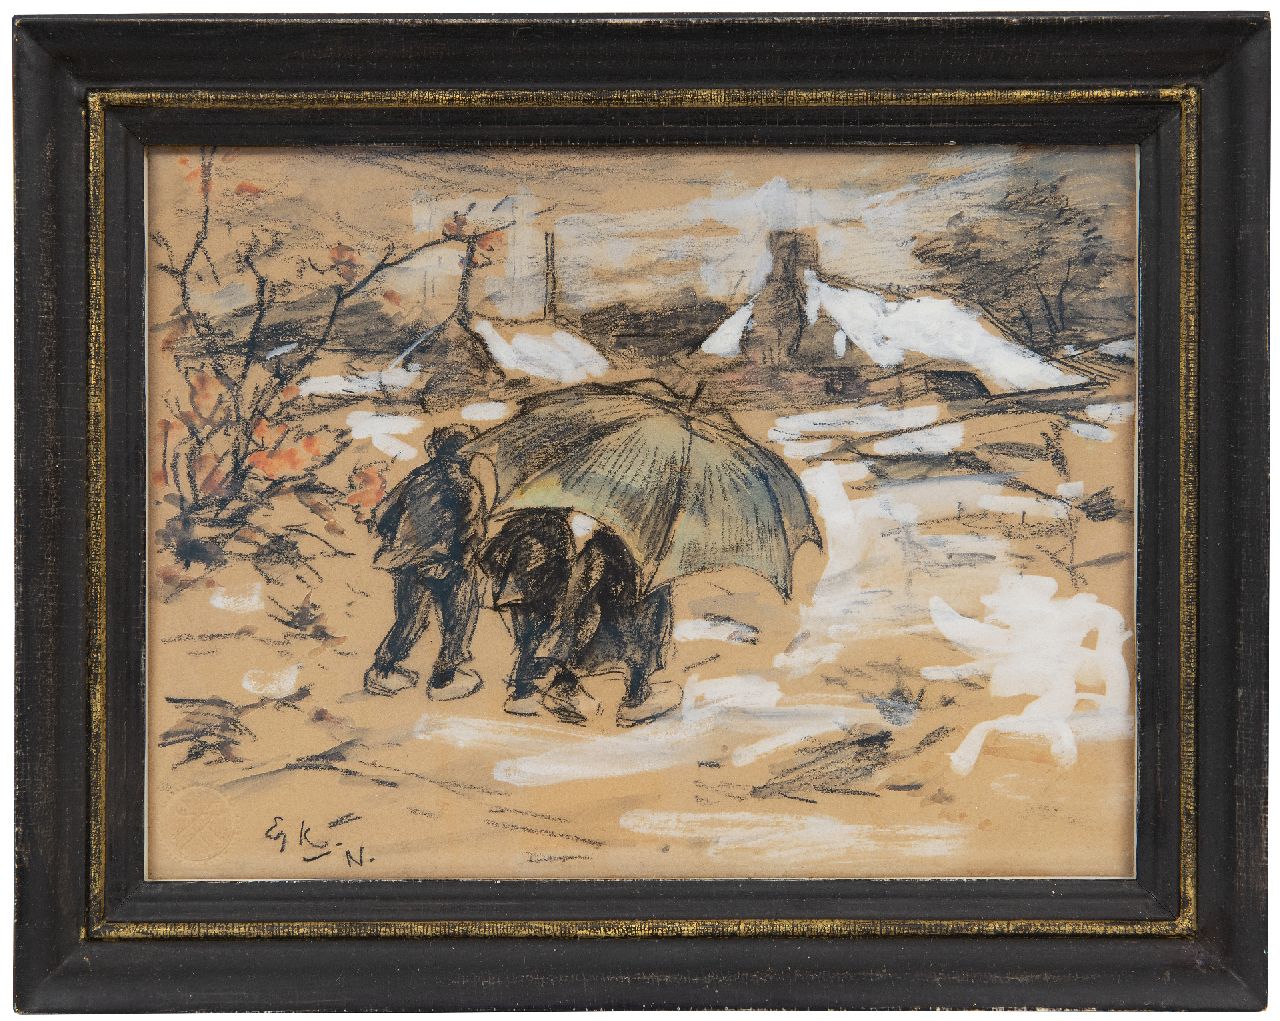 Koning E.W.  | 'Edzard' Willem Koning | Watercolours and drawings offered for sale | Peasant children under an umbrella, crayon and watercolour on paper 17.8 x 24.2 cm, signed l.l. with initials